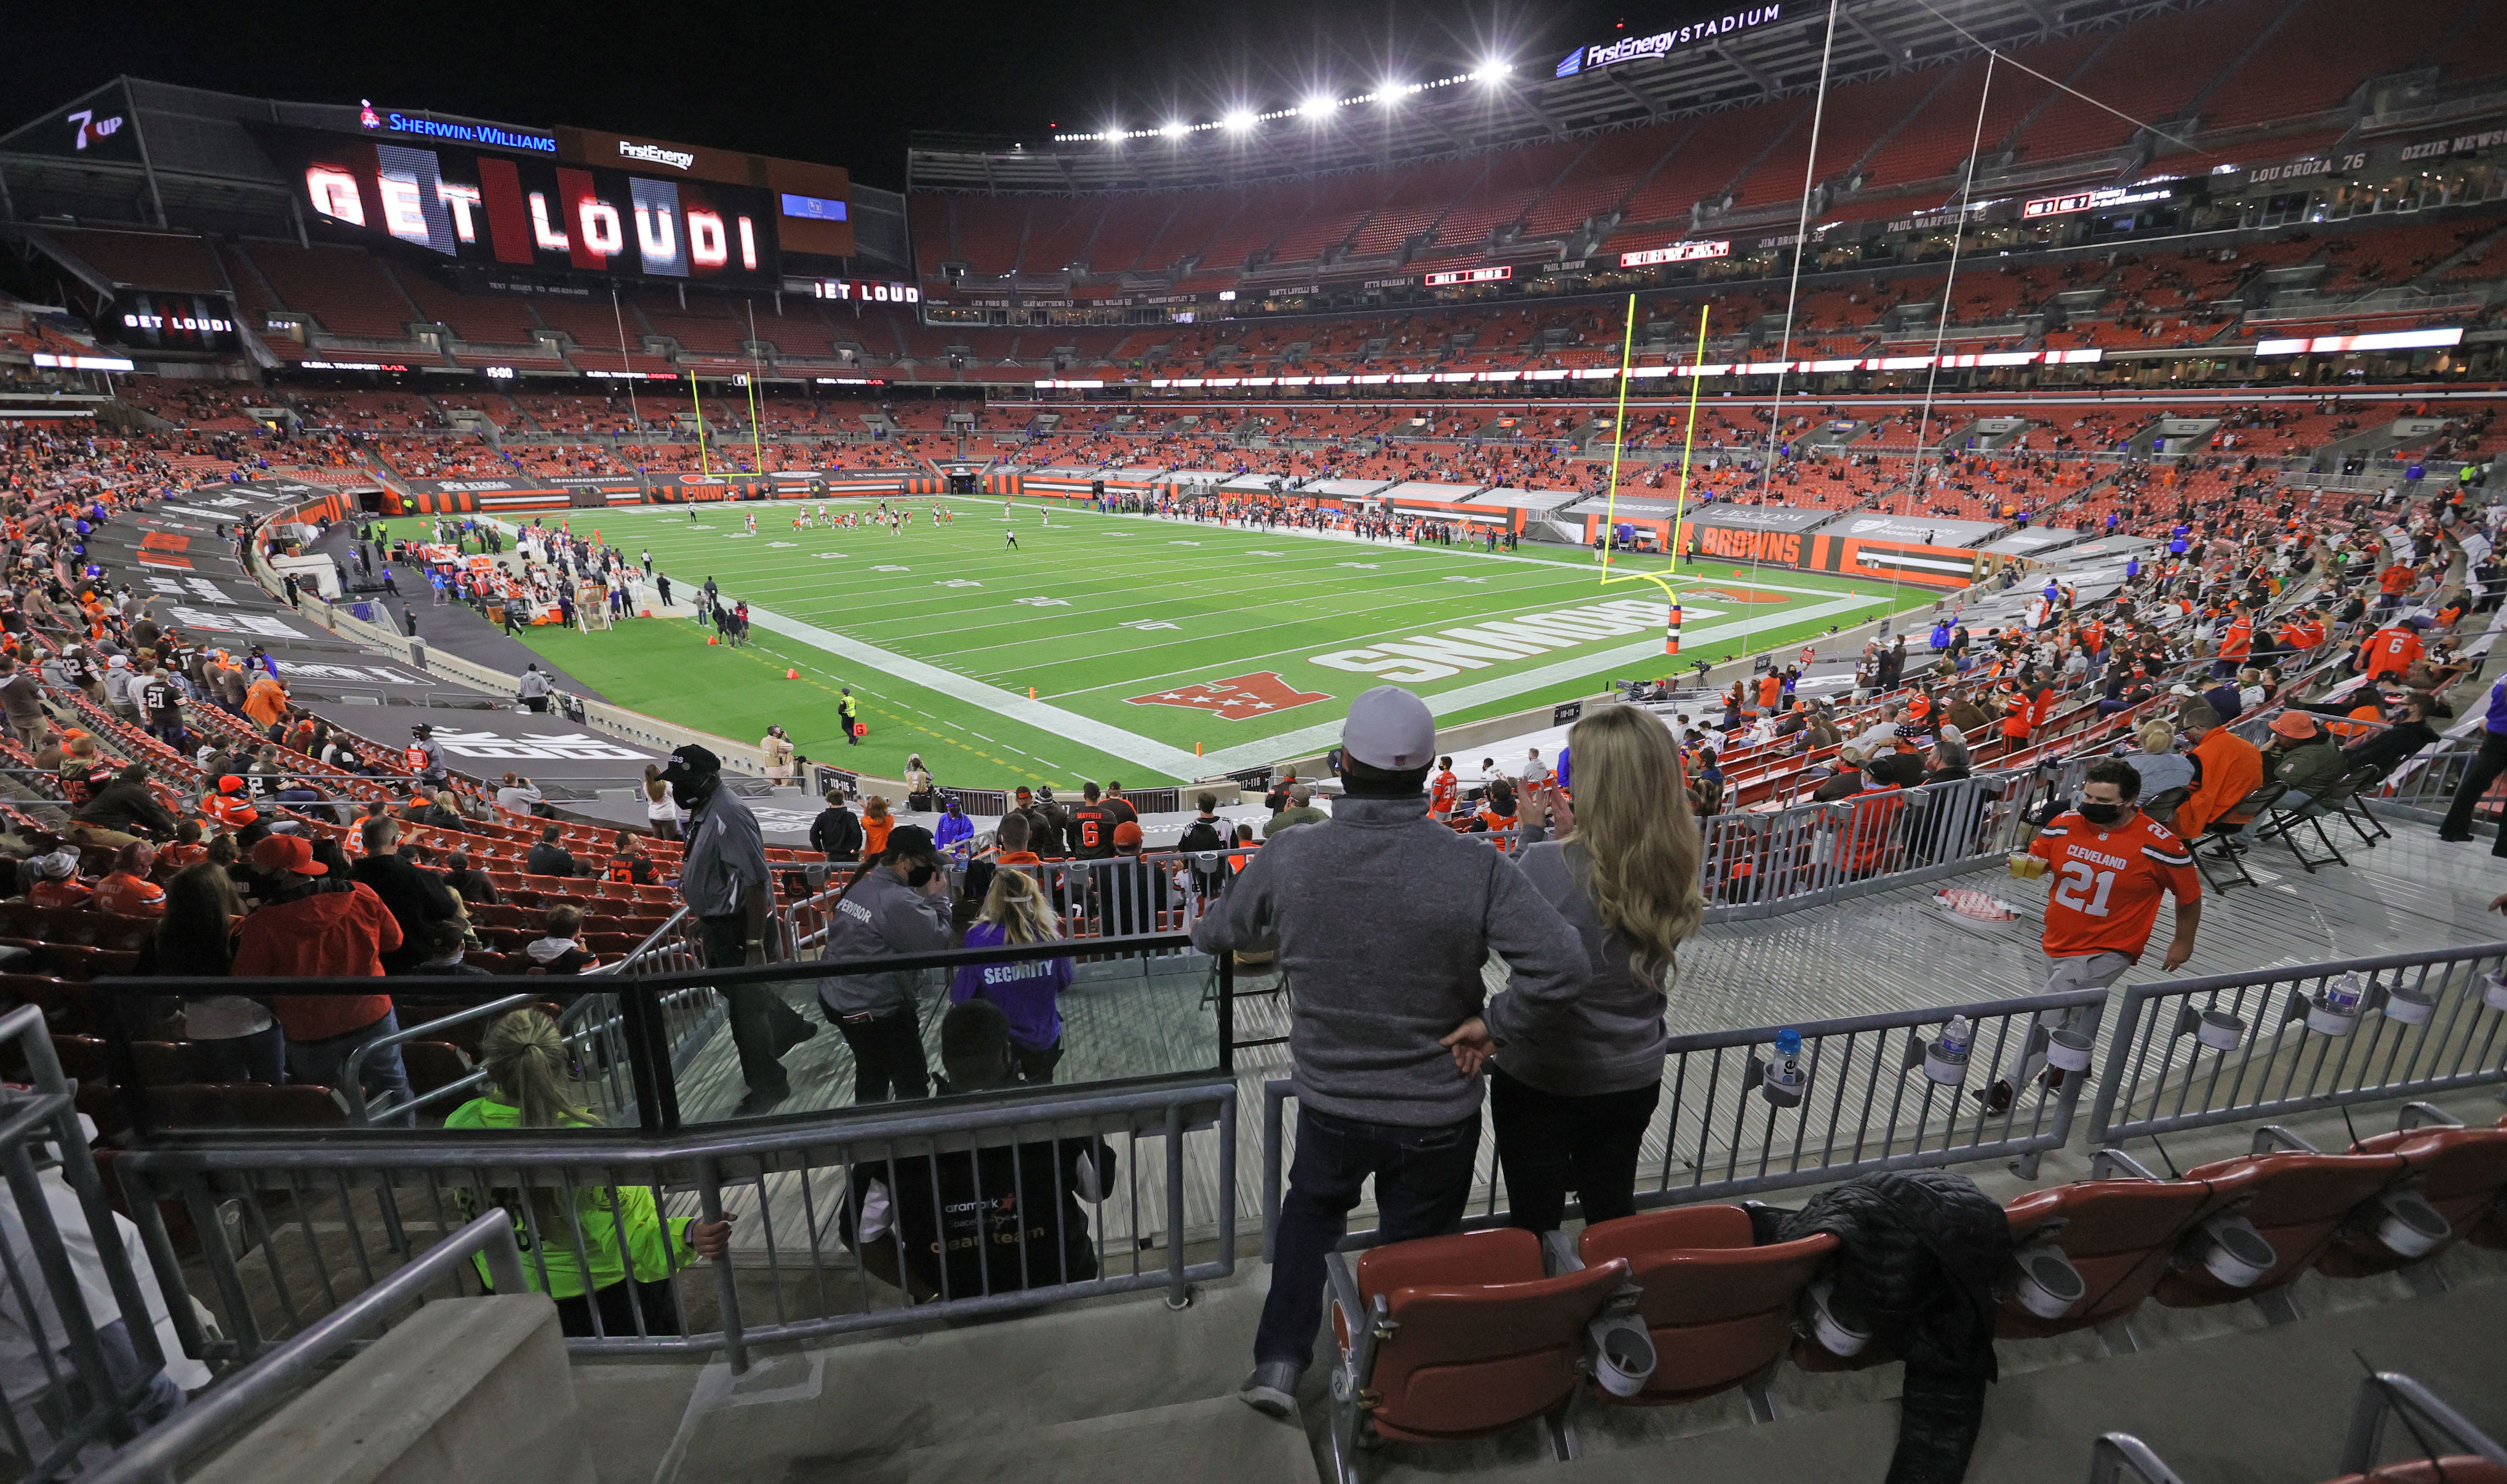 FirstEnergy Stadium employees violated Ohio coronavirus alcohol sales  restrictions during Cleveland Browns home game, state says 